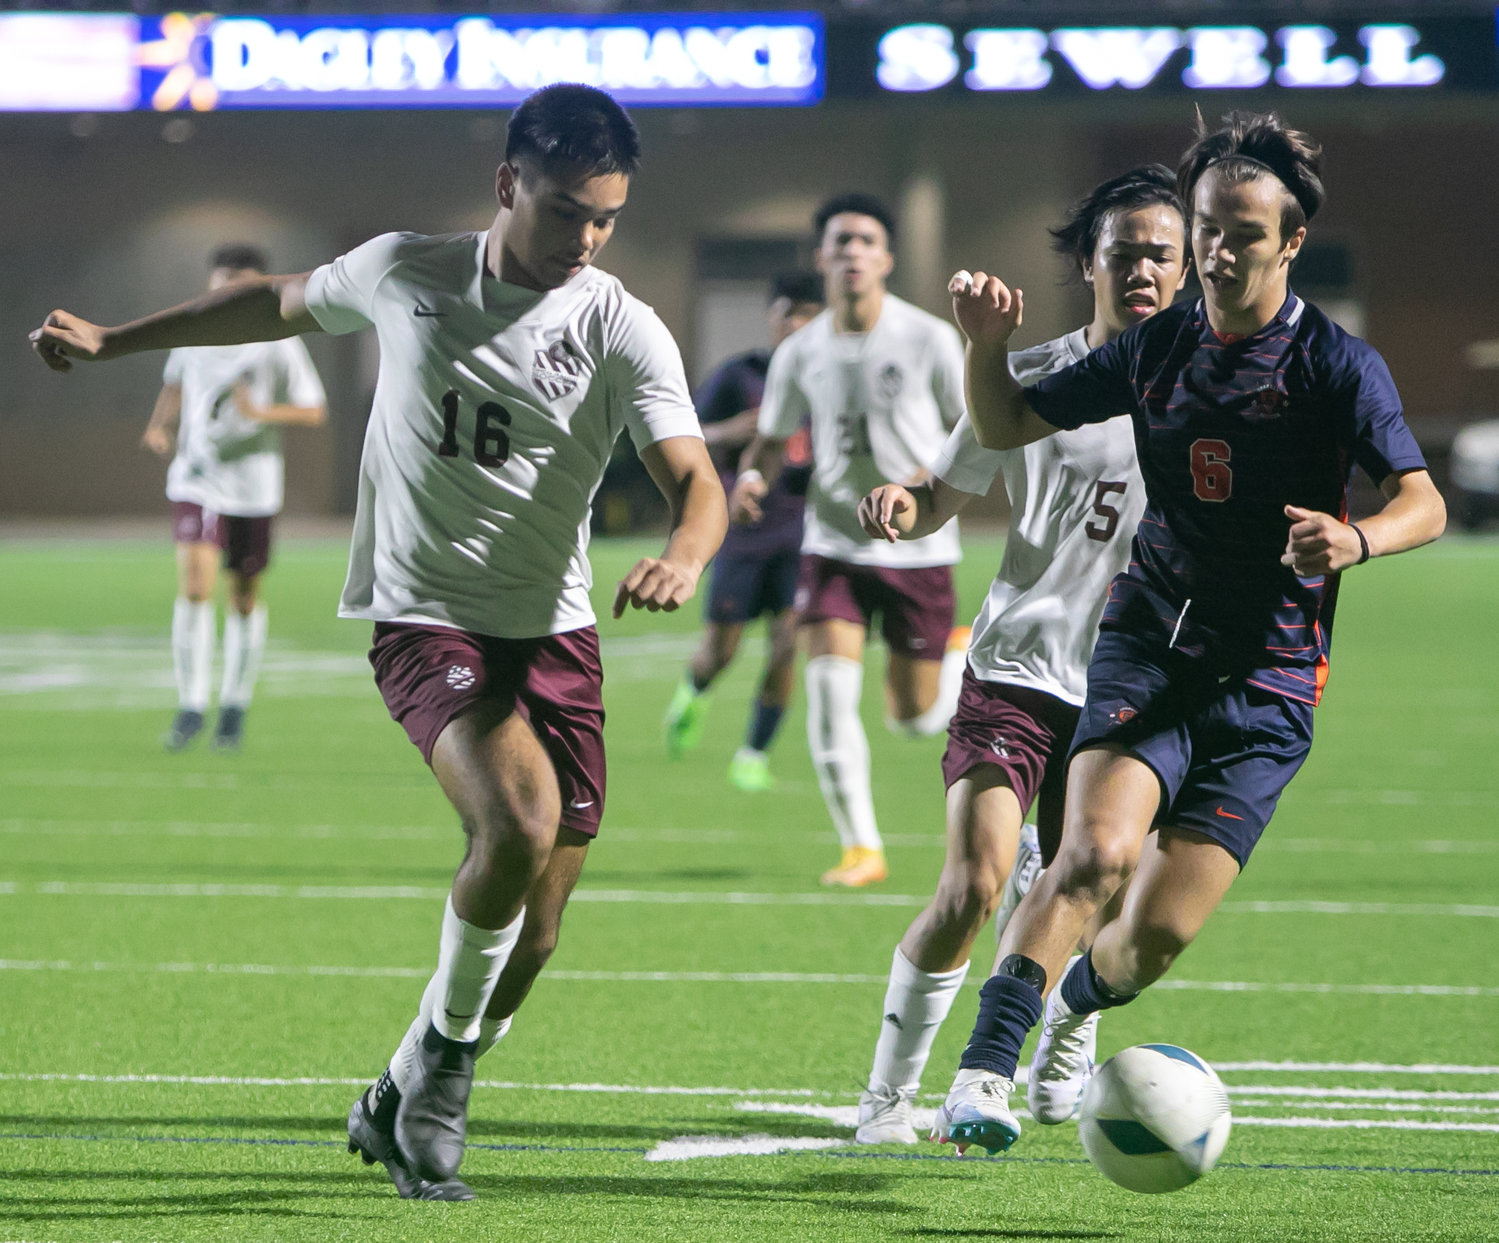 Kortay Koc and Andres Reira go after a ball during Friday's Class 6A Regional Quarterfinal game between Seven Lakes and Cinco Ranch at Legacy Stadium.